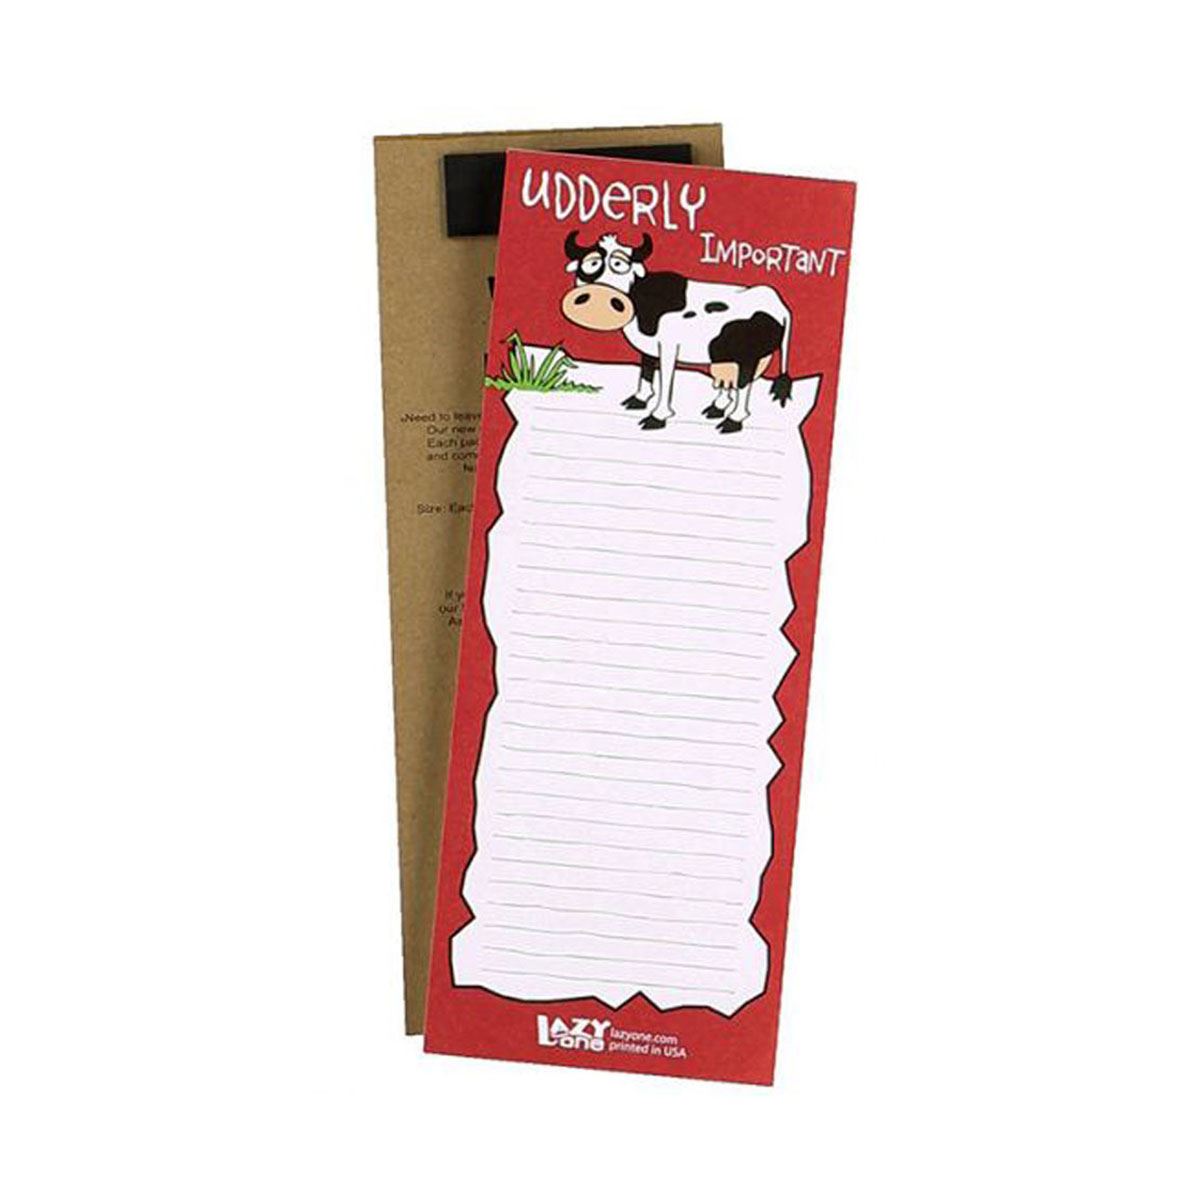 LazyOne Udderly Important Notepad - Just Horse Riders